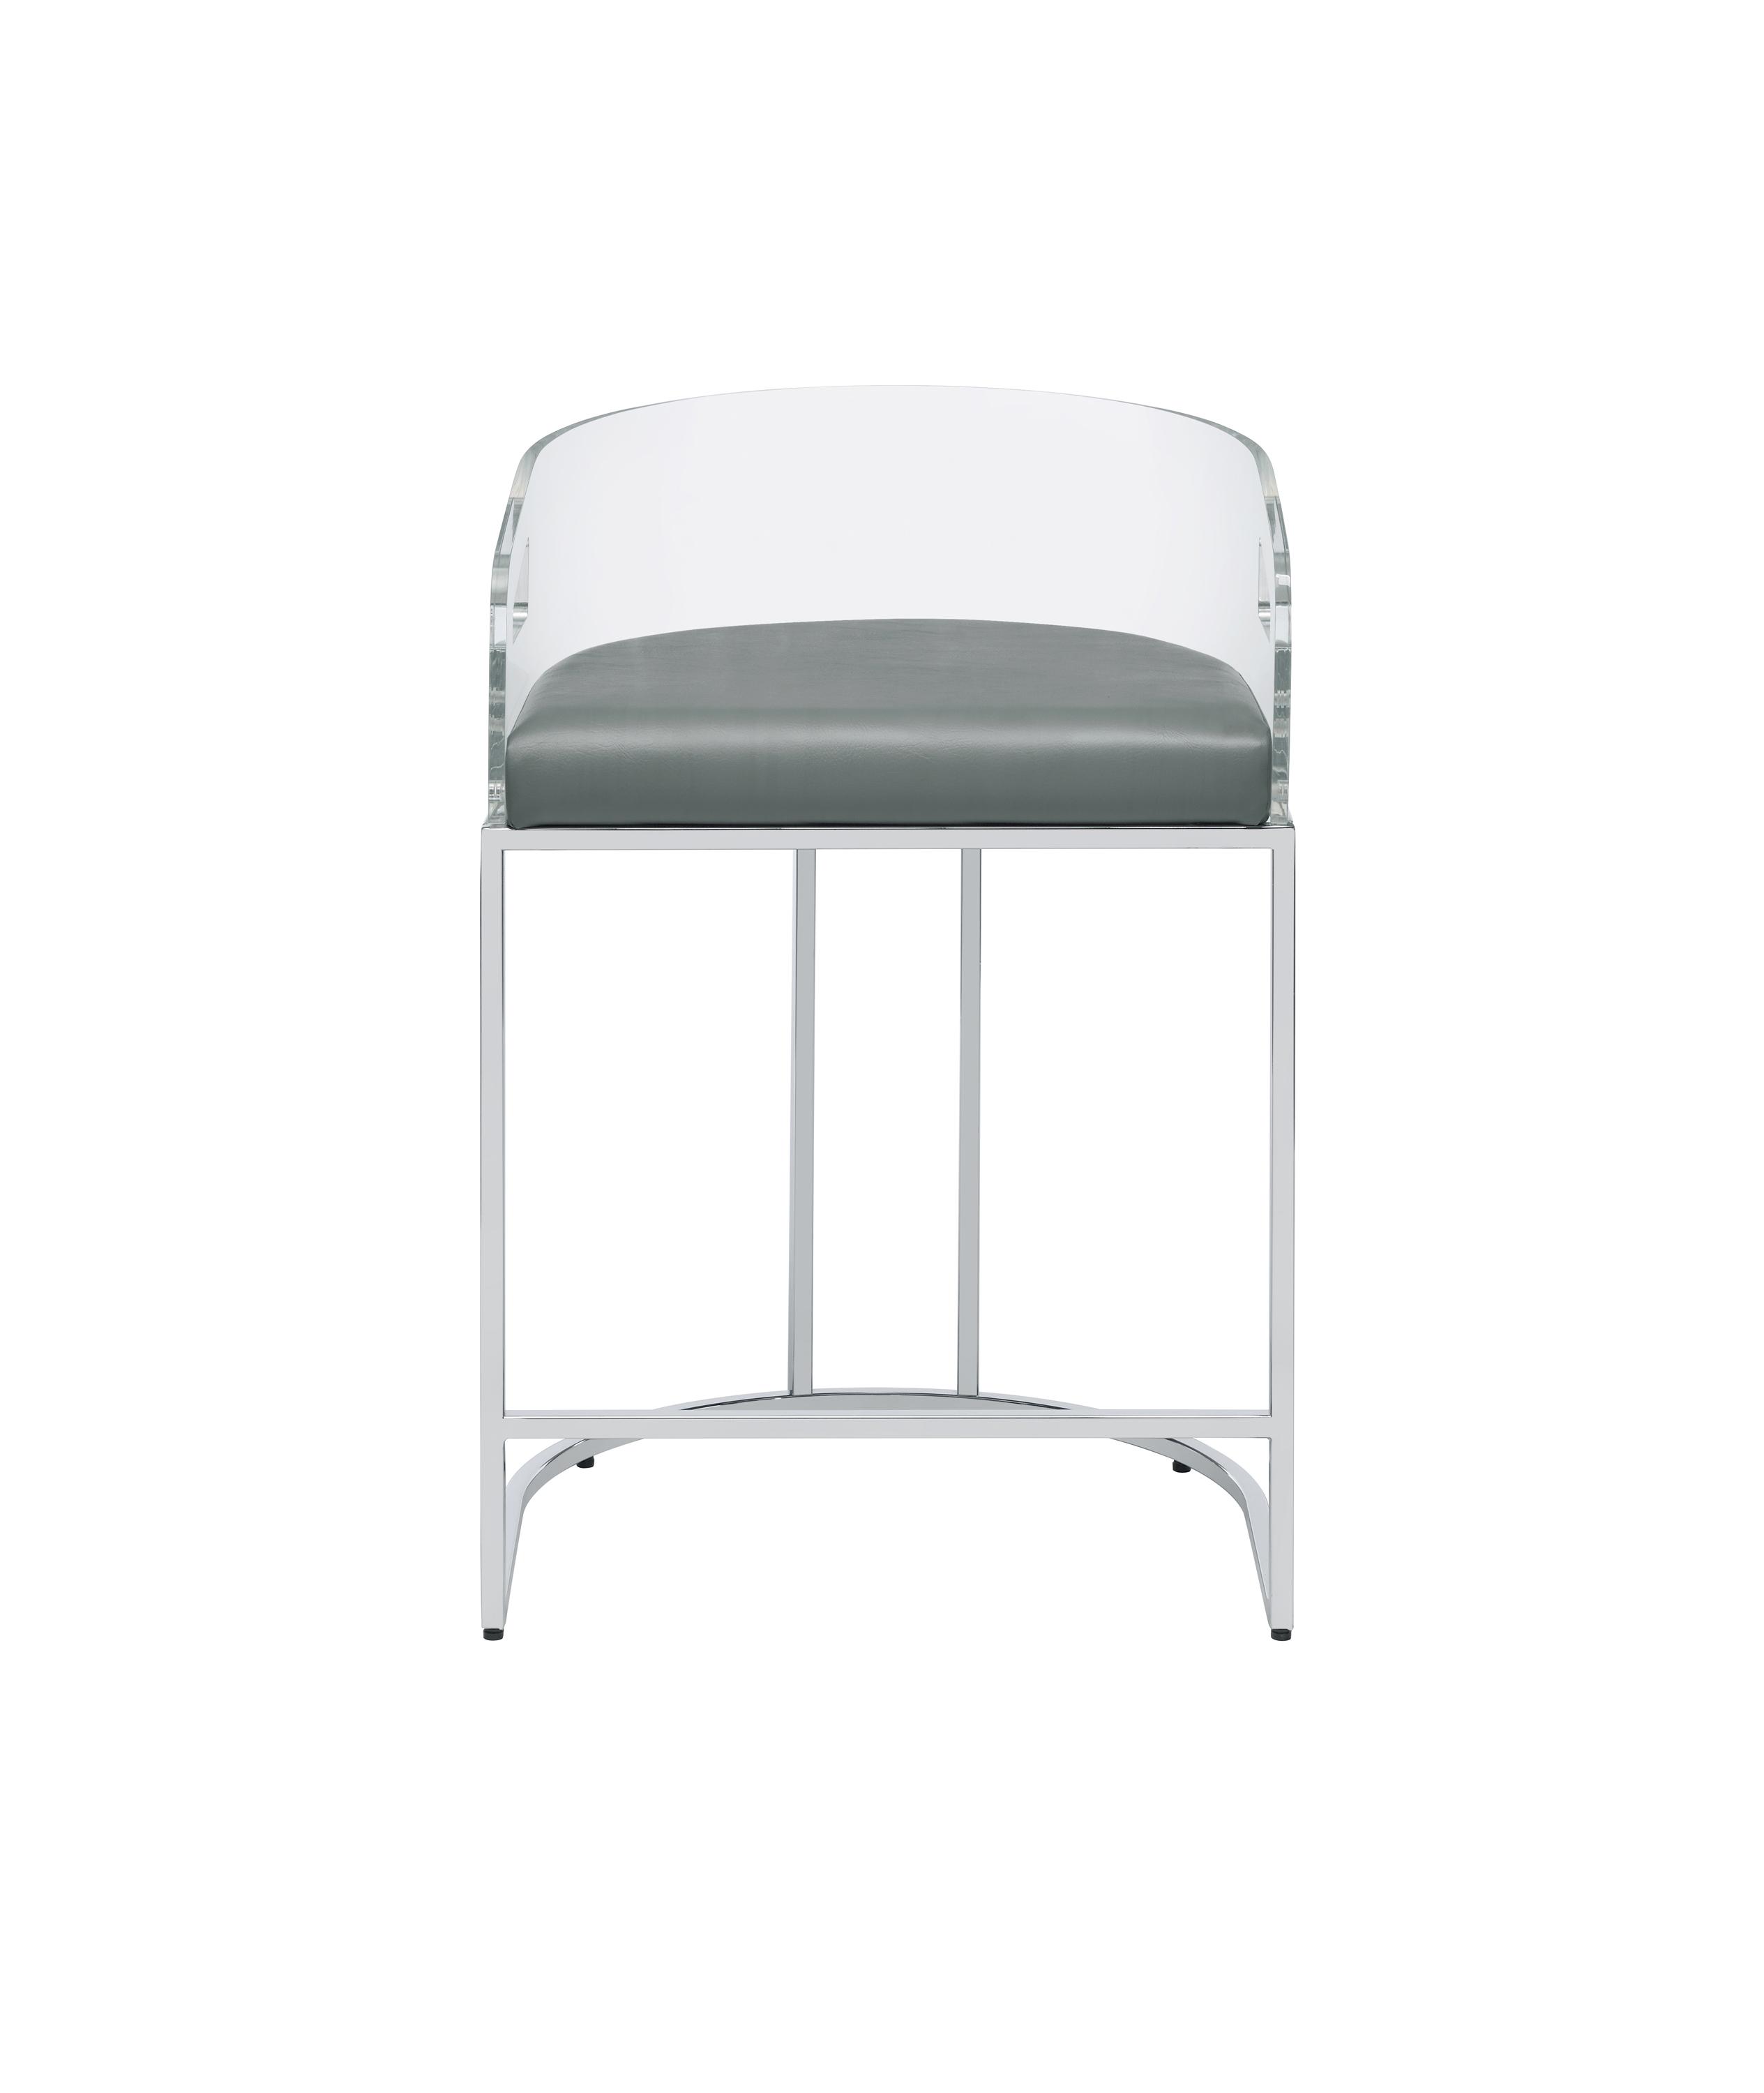 Modern Counter Height Stool Set 183405 183405 in Clear, Gray Leatherette